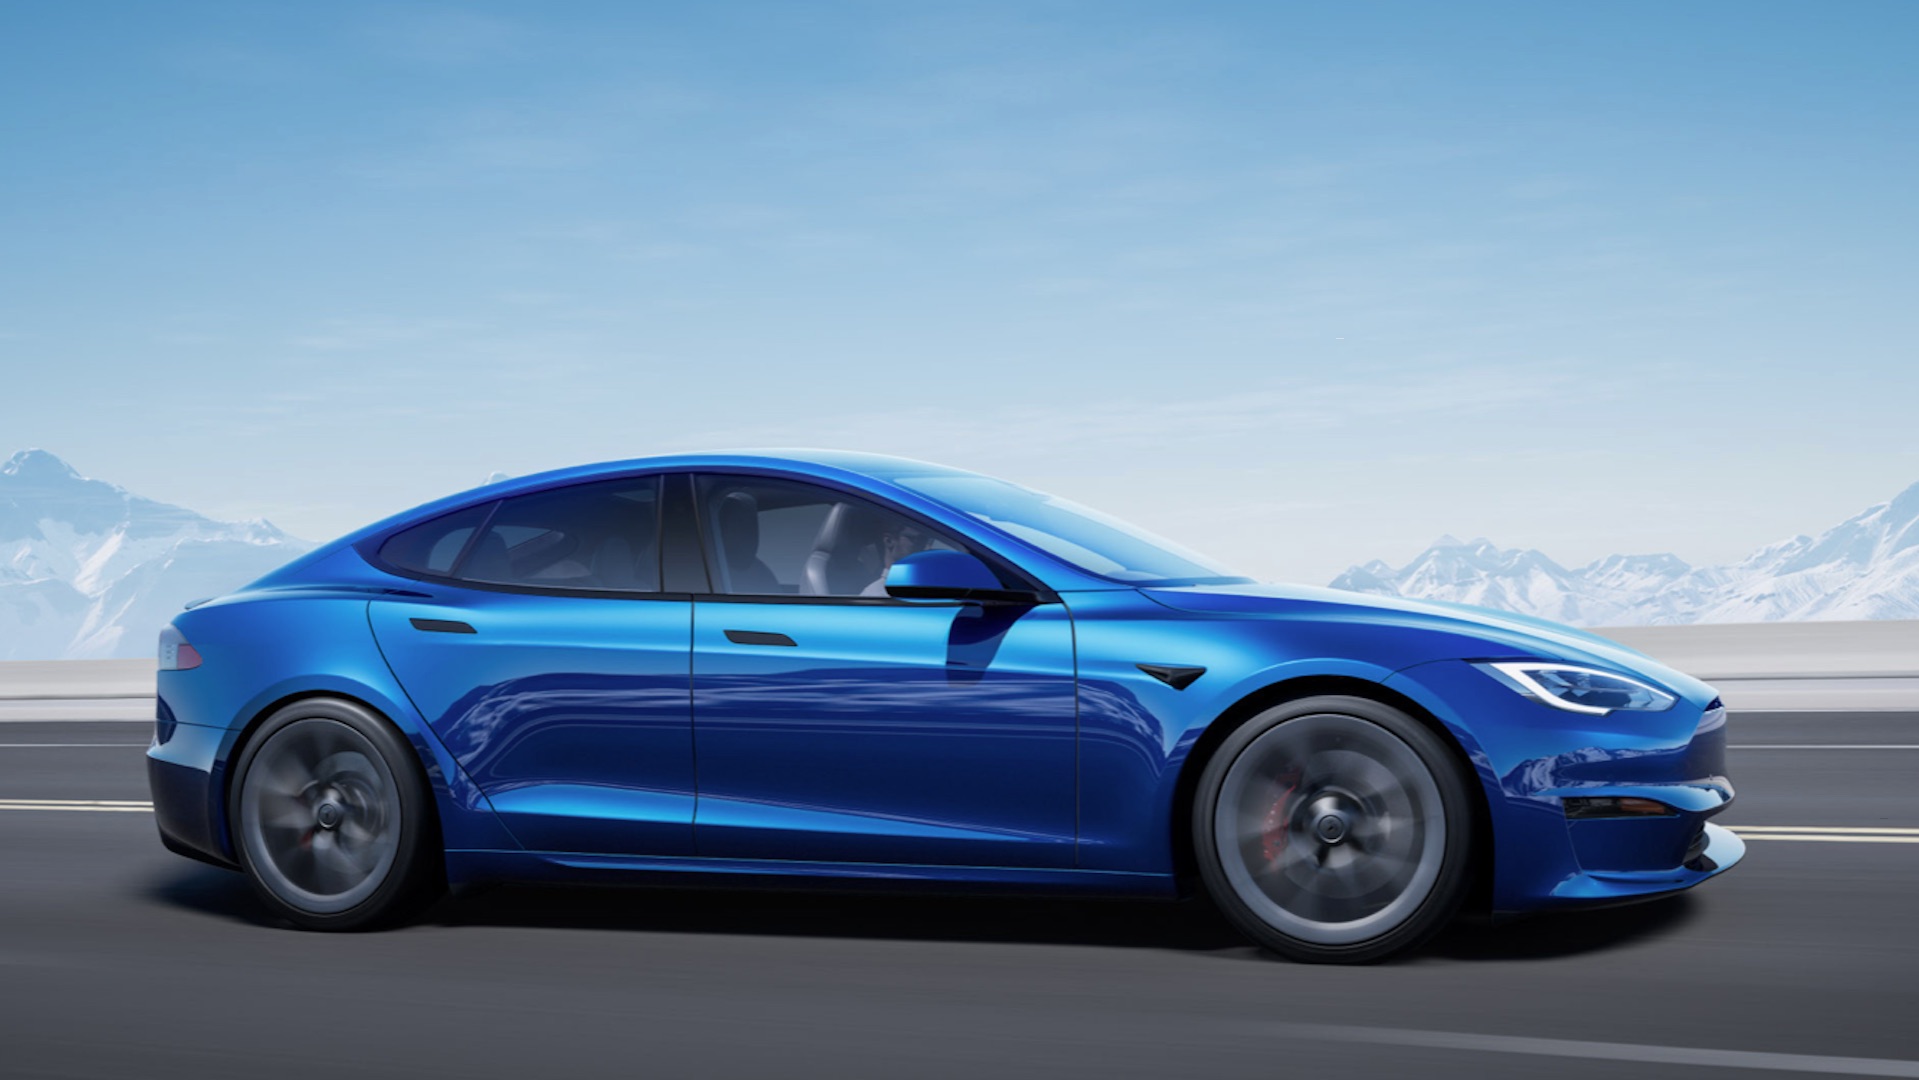 The hacked Tesla Model S can reach 347 km / h

